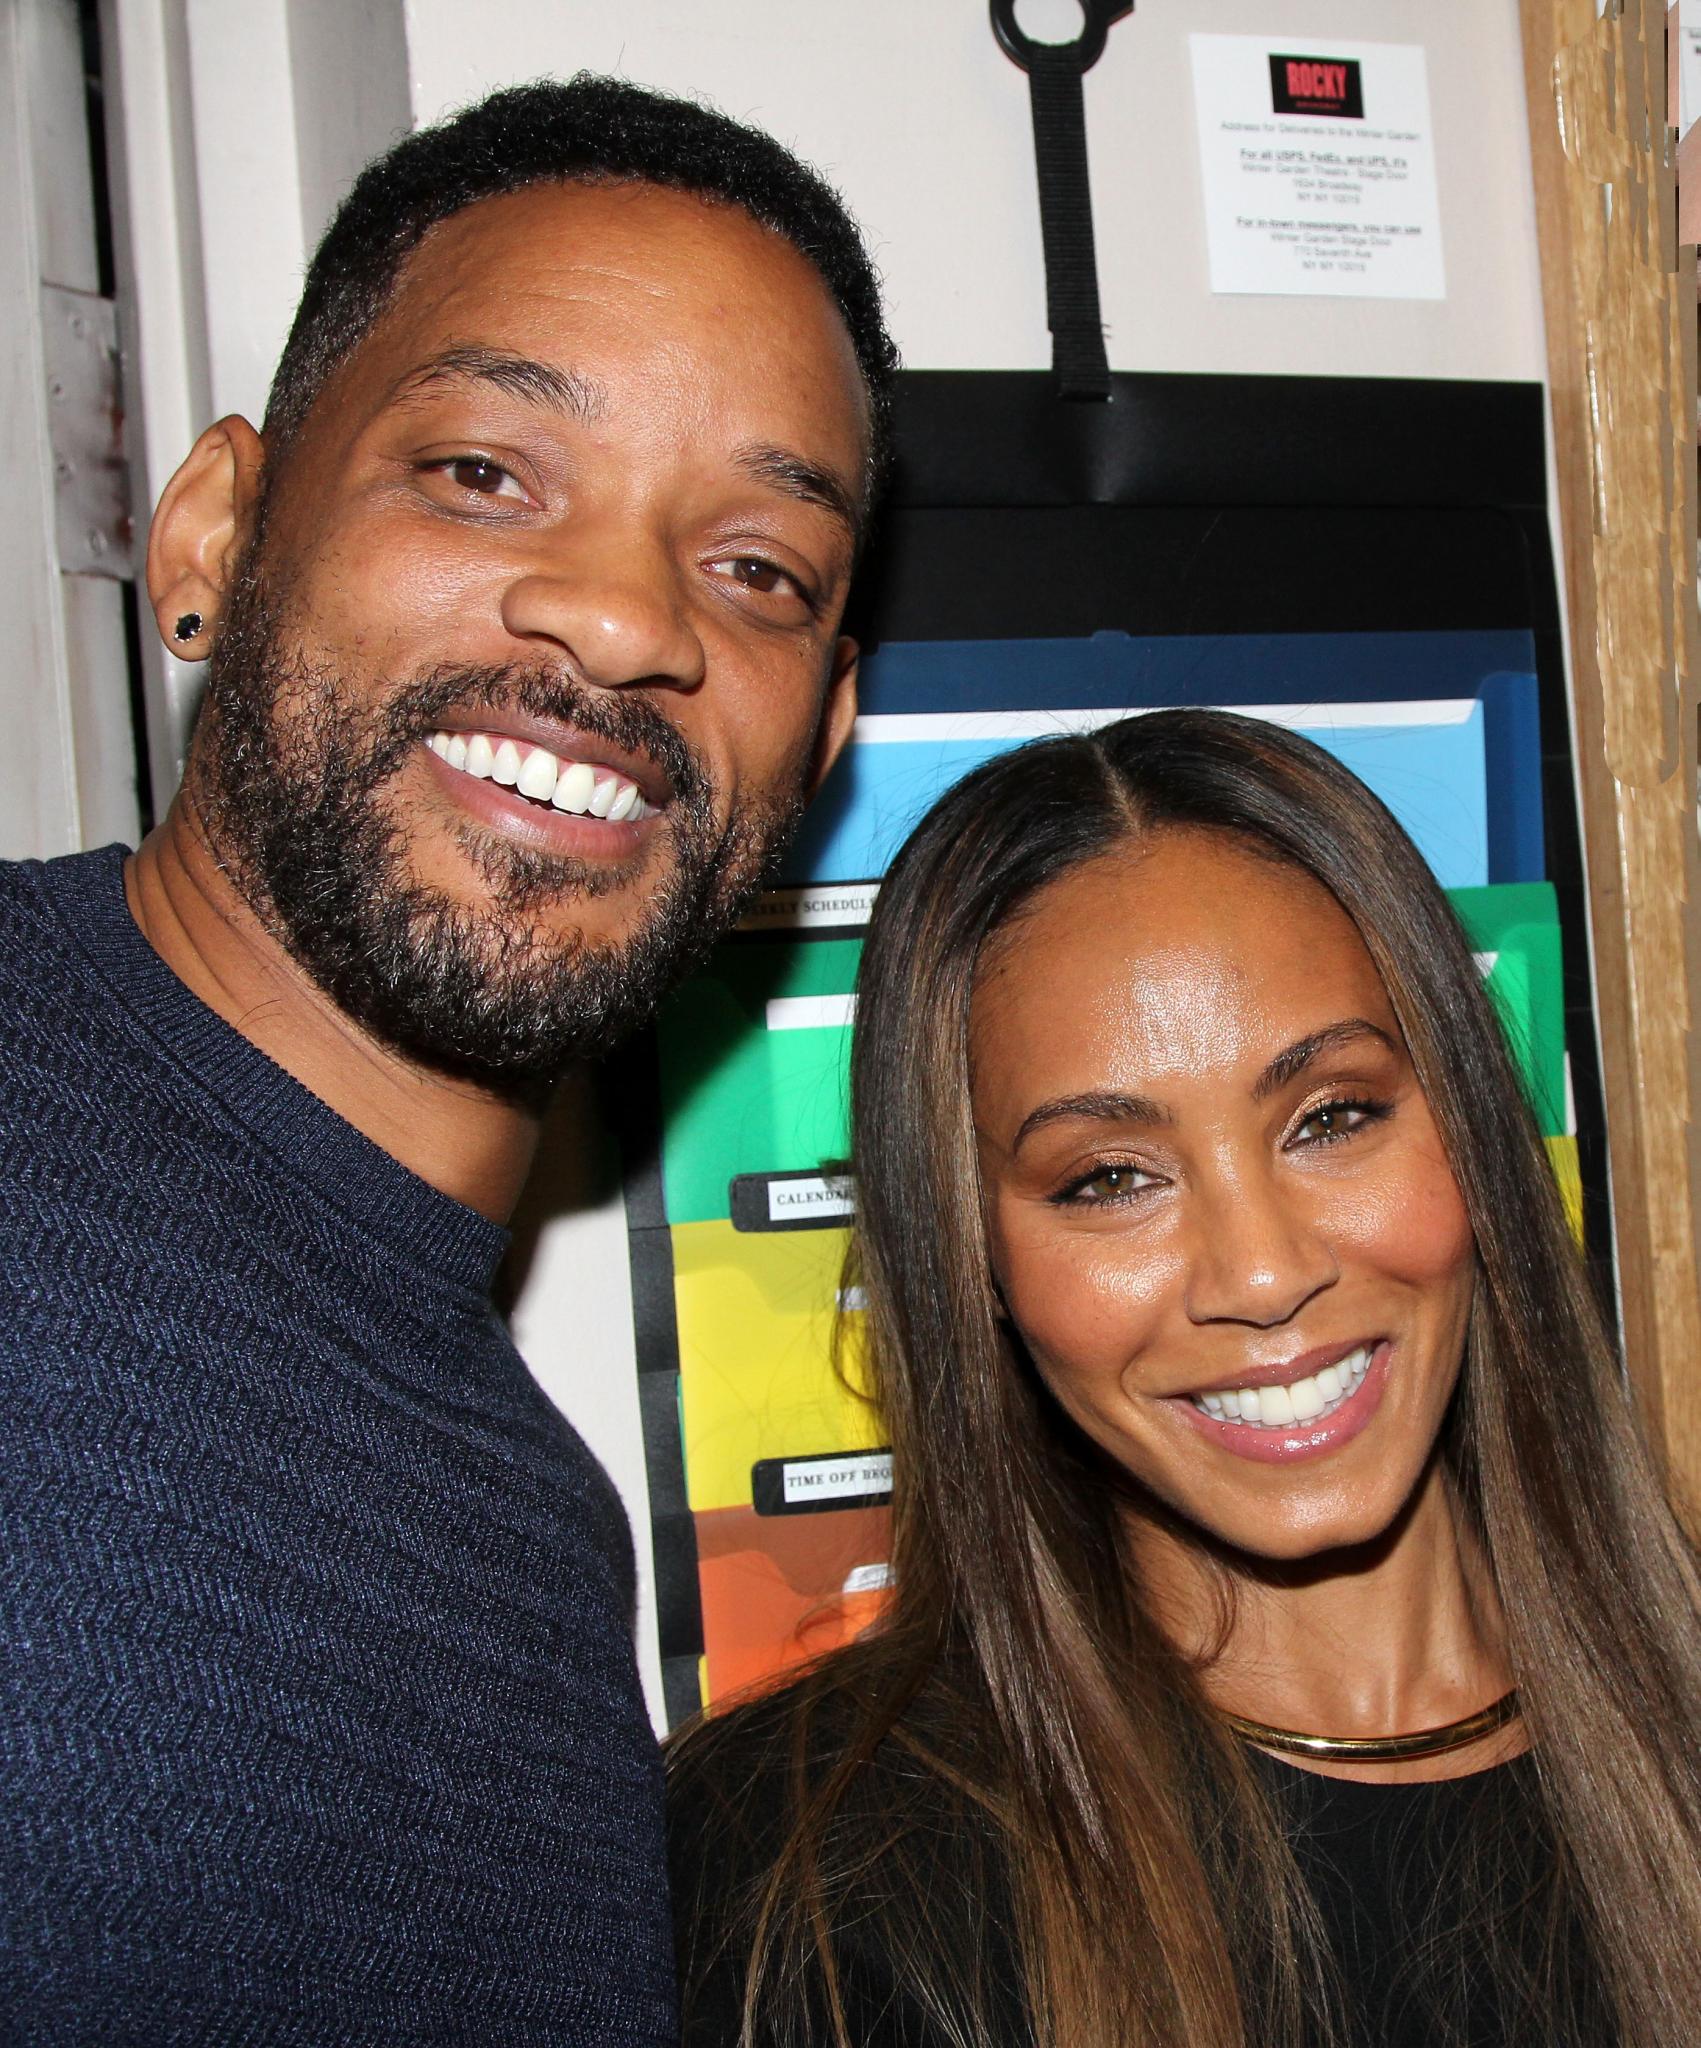 Jada Pinkett Smith on Learning to 'Go With the Flow' in Marriage
